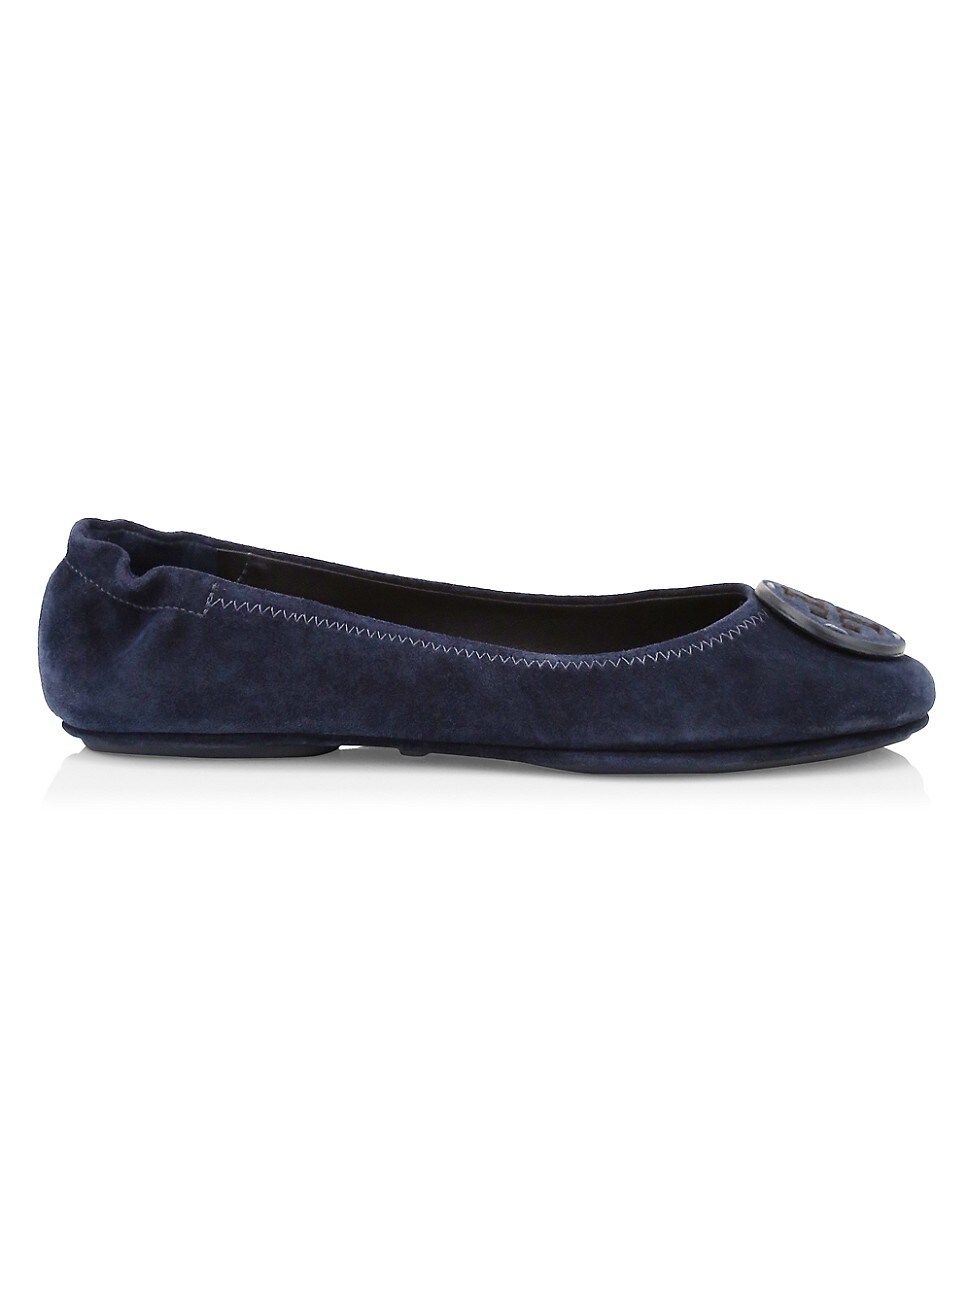 Tory Burch Minnie Suede Ballet Flats | Saks Fifth Avenue